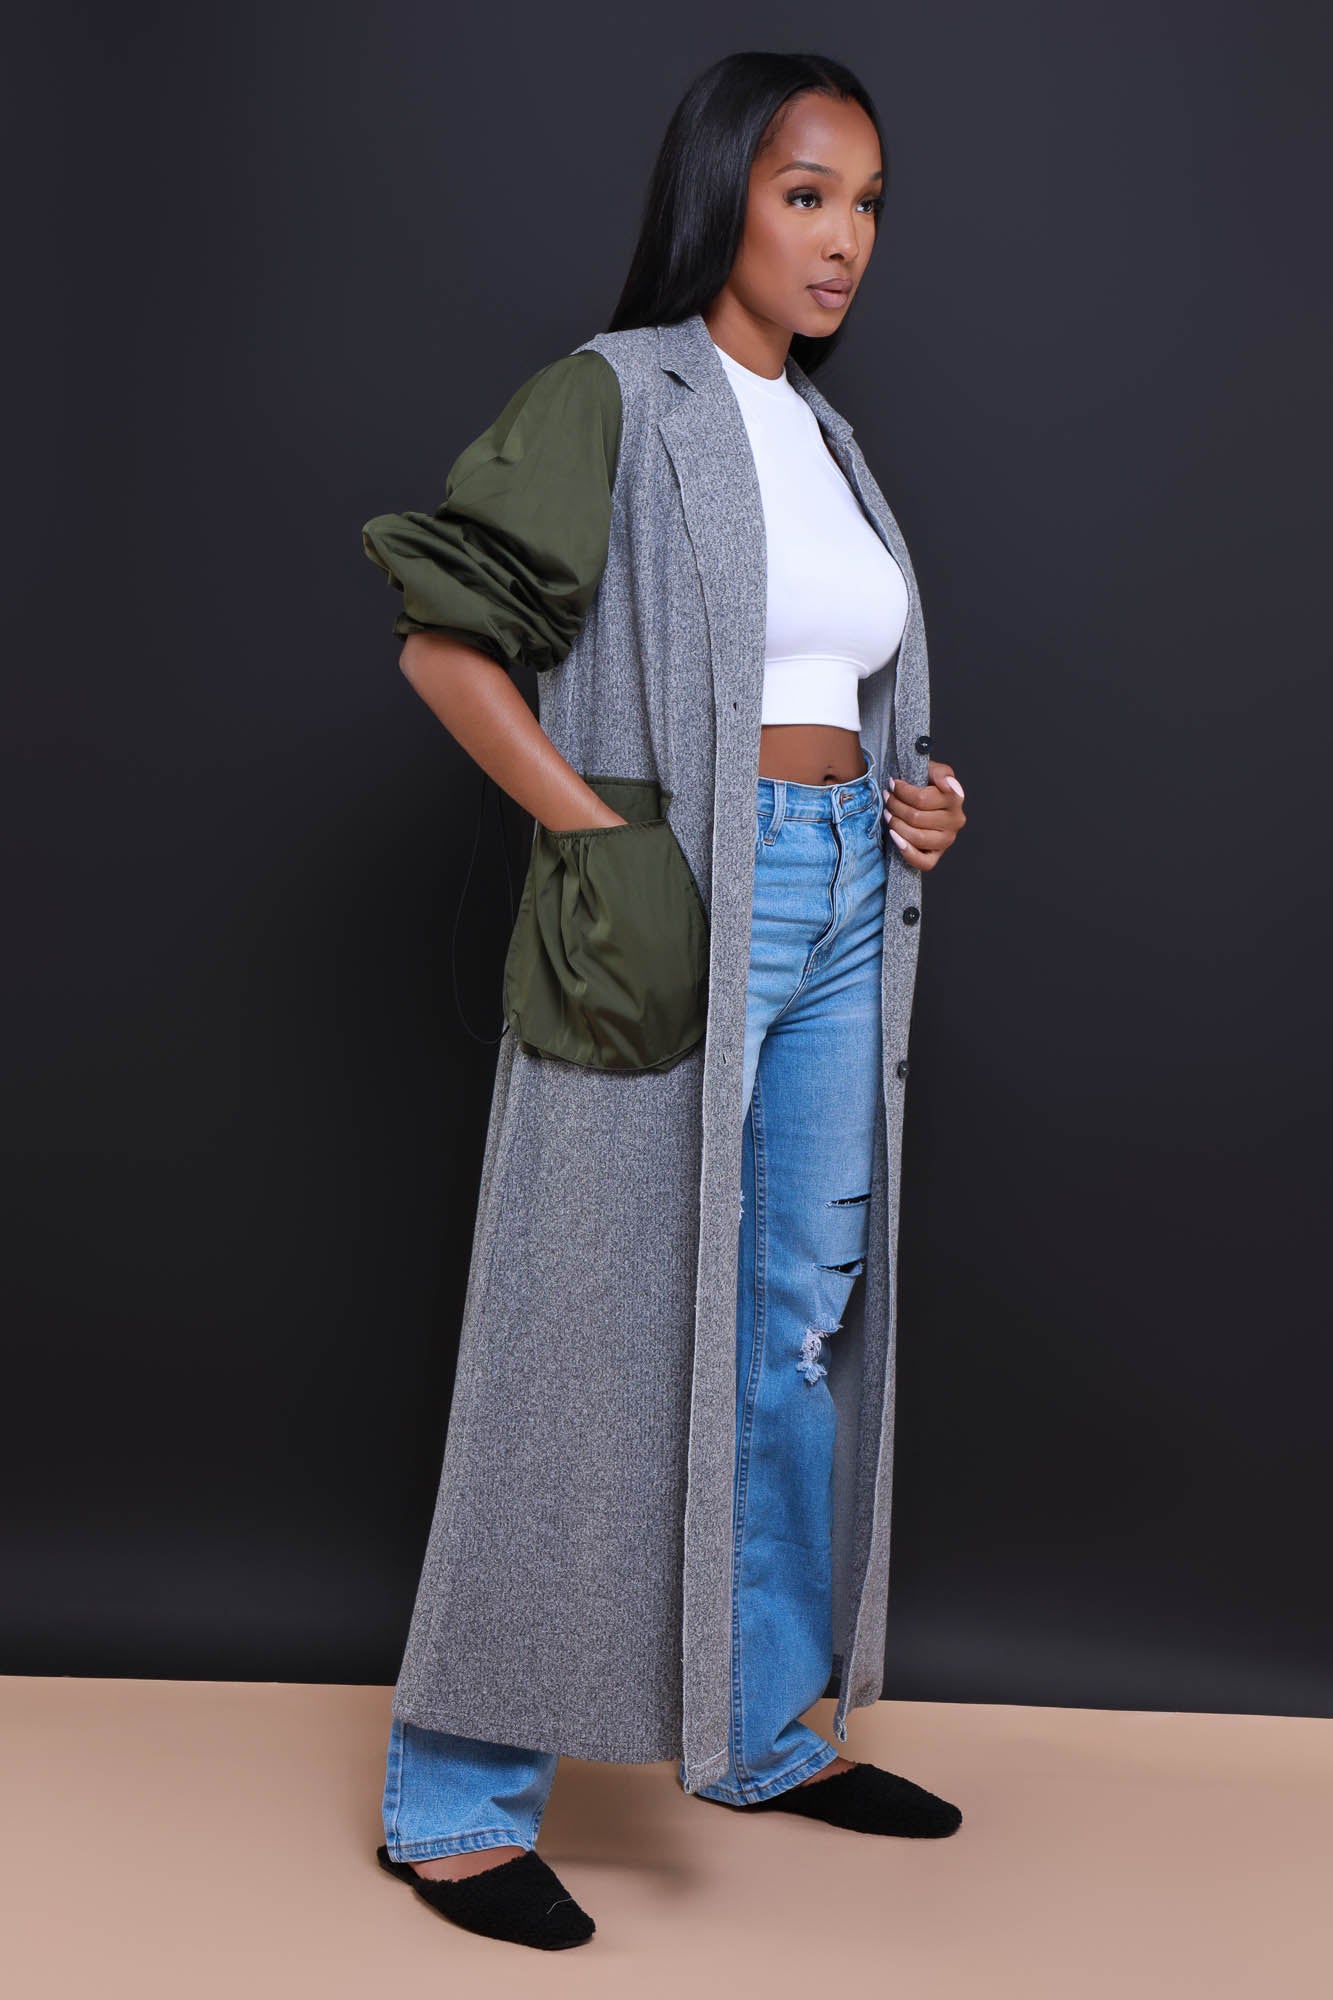 Leave It All Button Up Maxi Cardigan - Gray/Olive - Swank A Posh